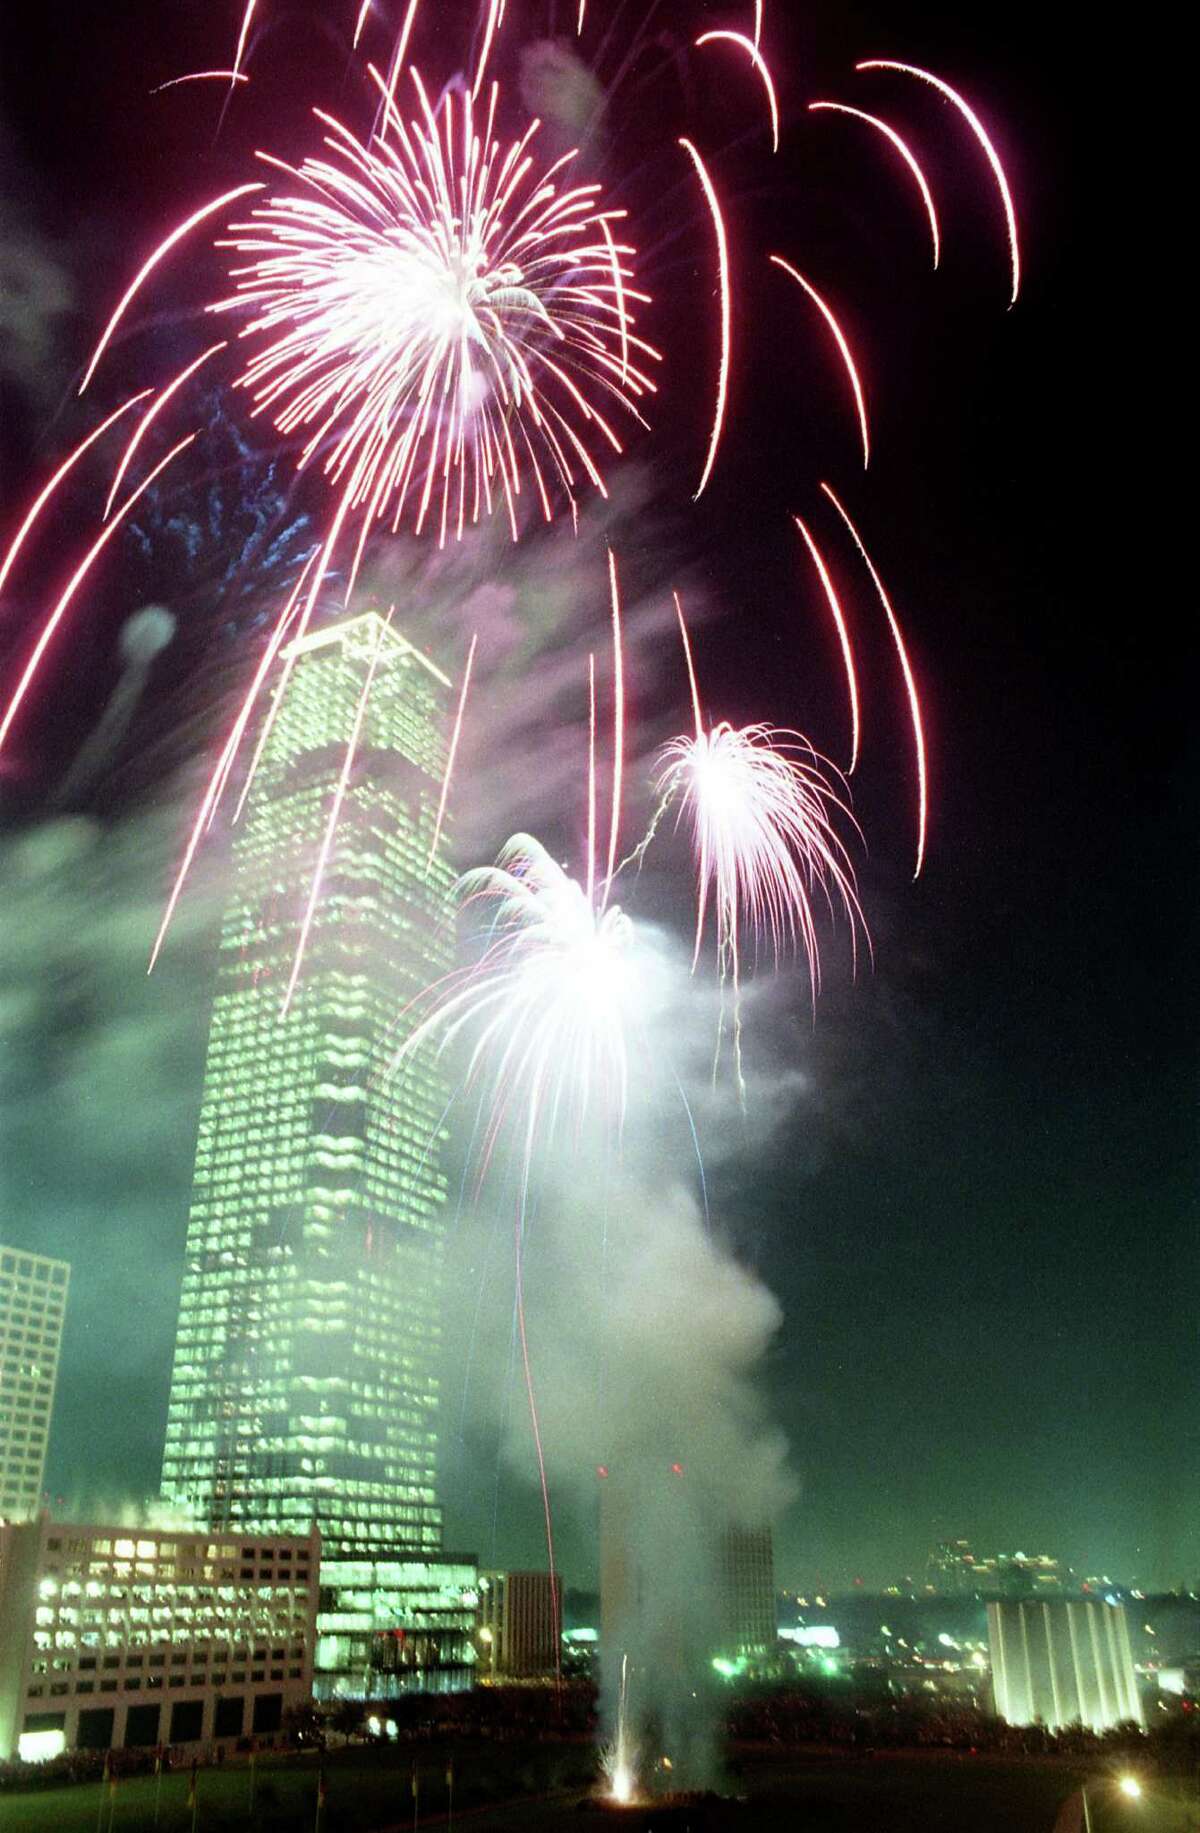 New Year's Eve fireworks display in Uptown area, Dec. 31, 1986.